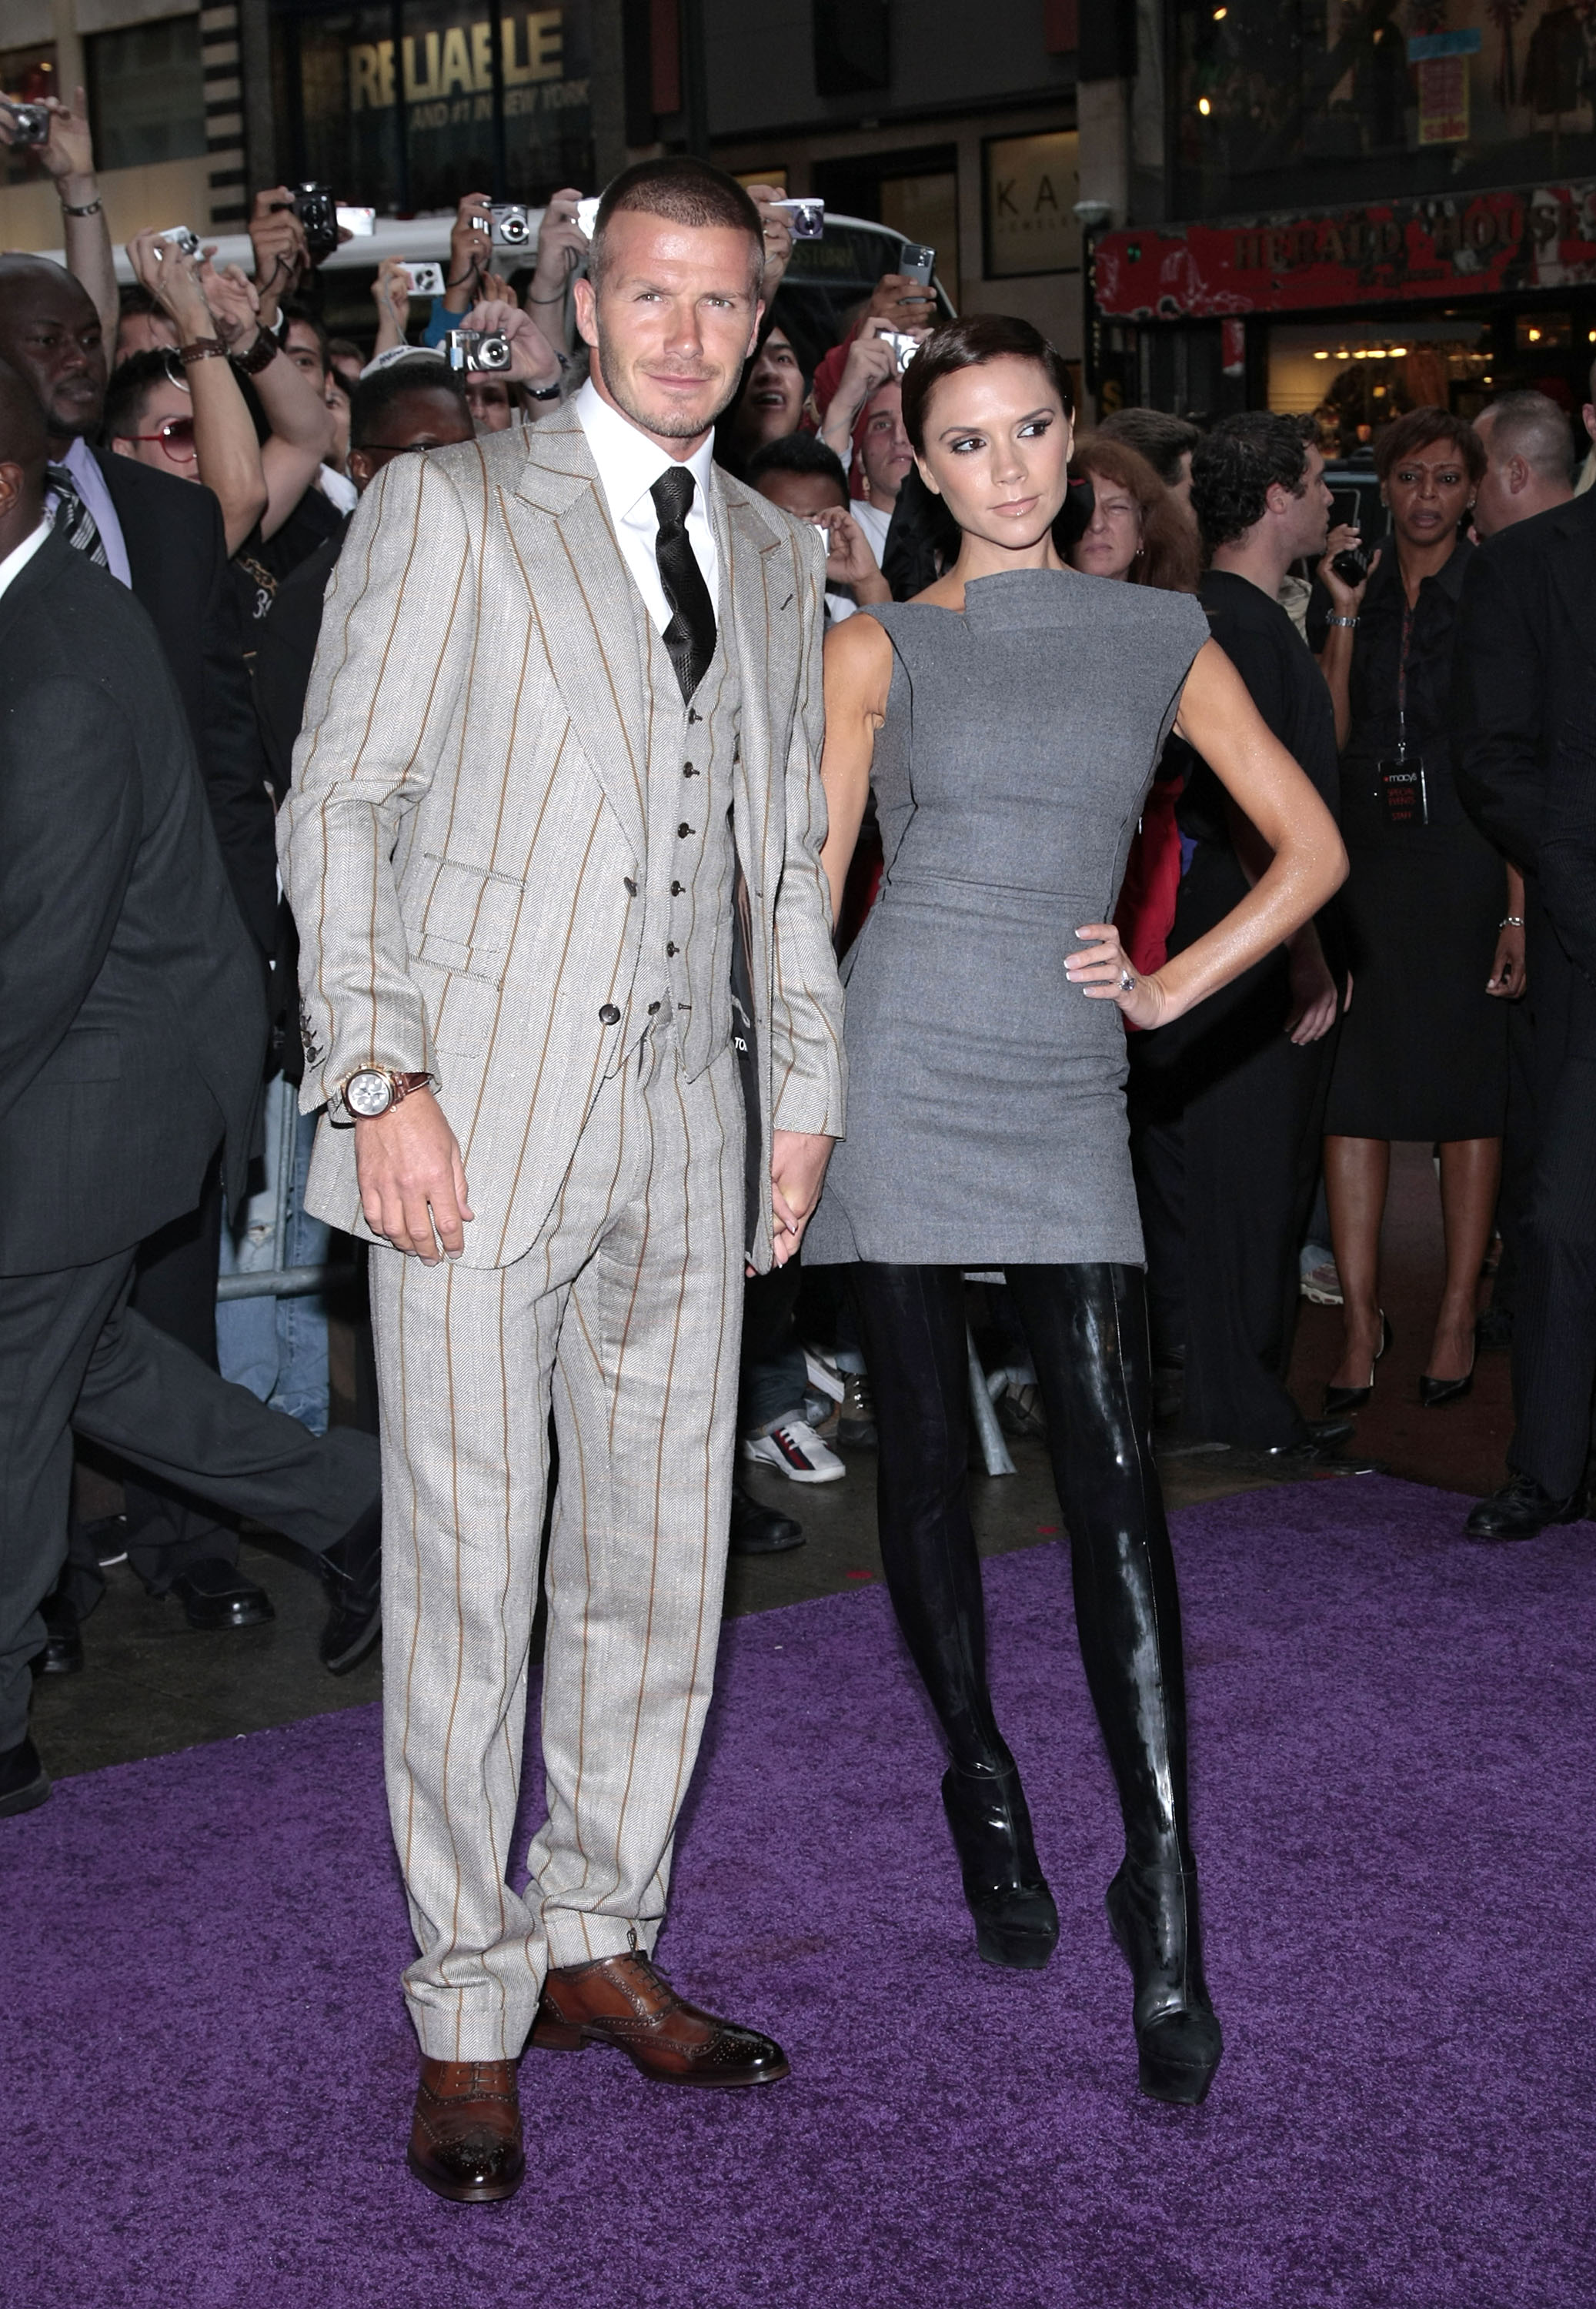 David and Victoria Beckham attend the launch of the Beckham Signature fragrance collection in New York City on September 26, 2008 | Source: Getty Images